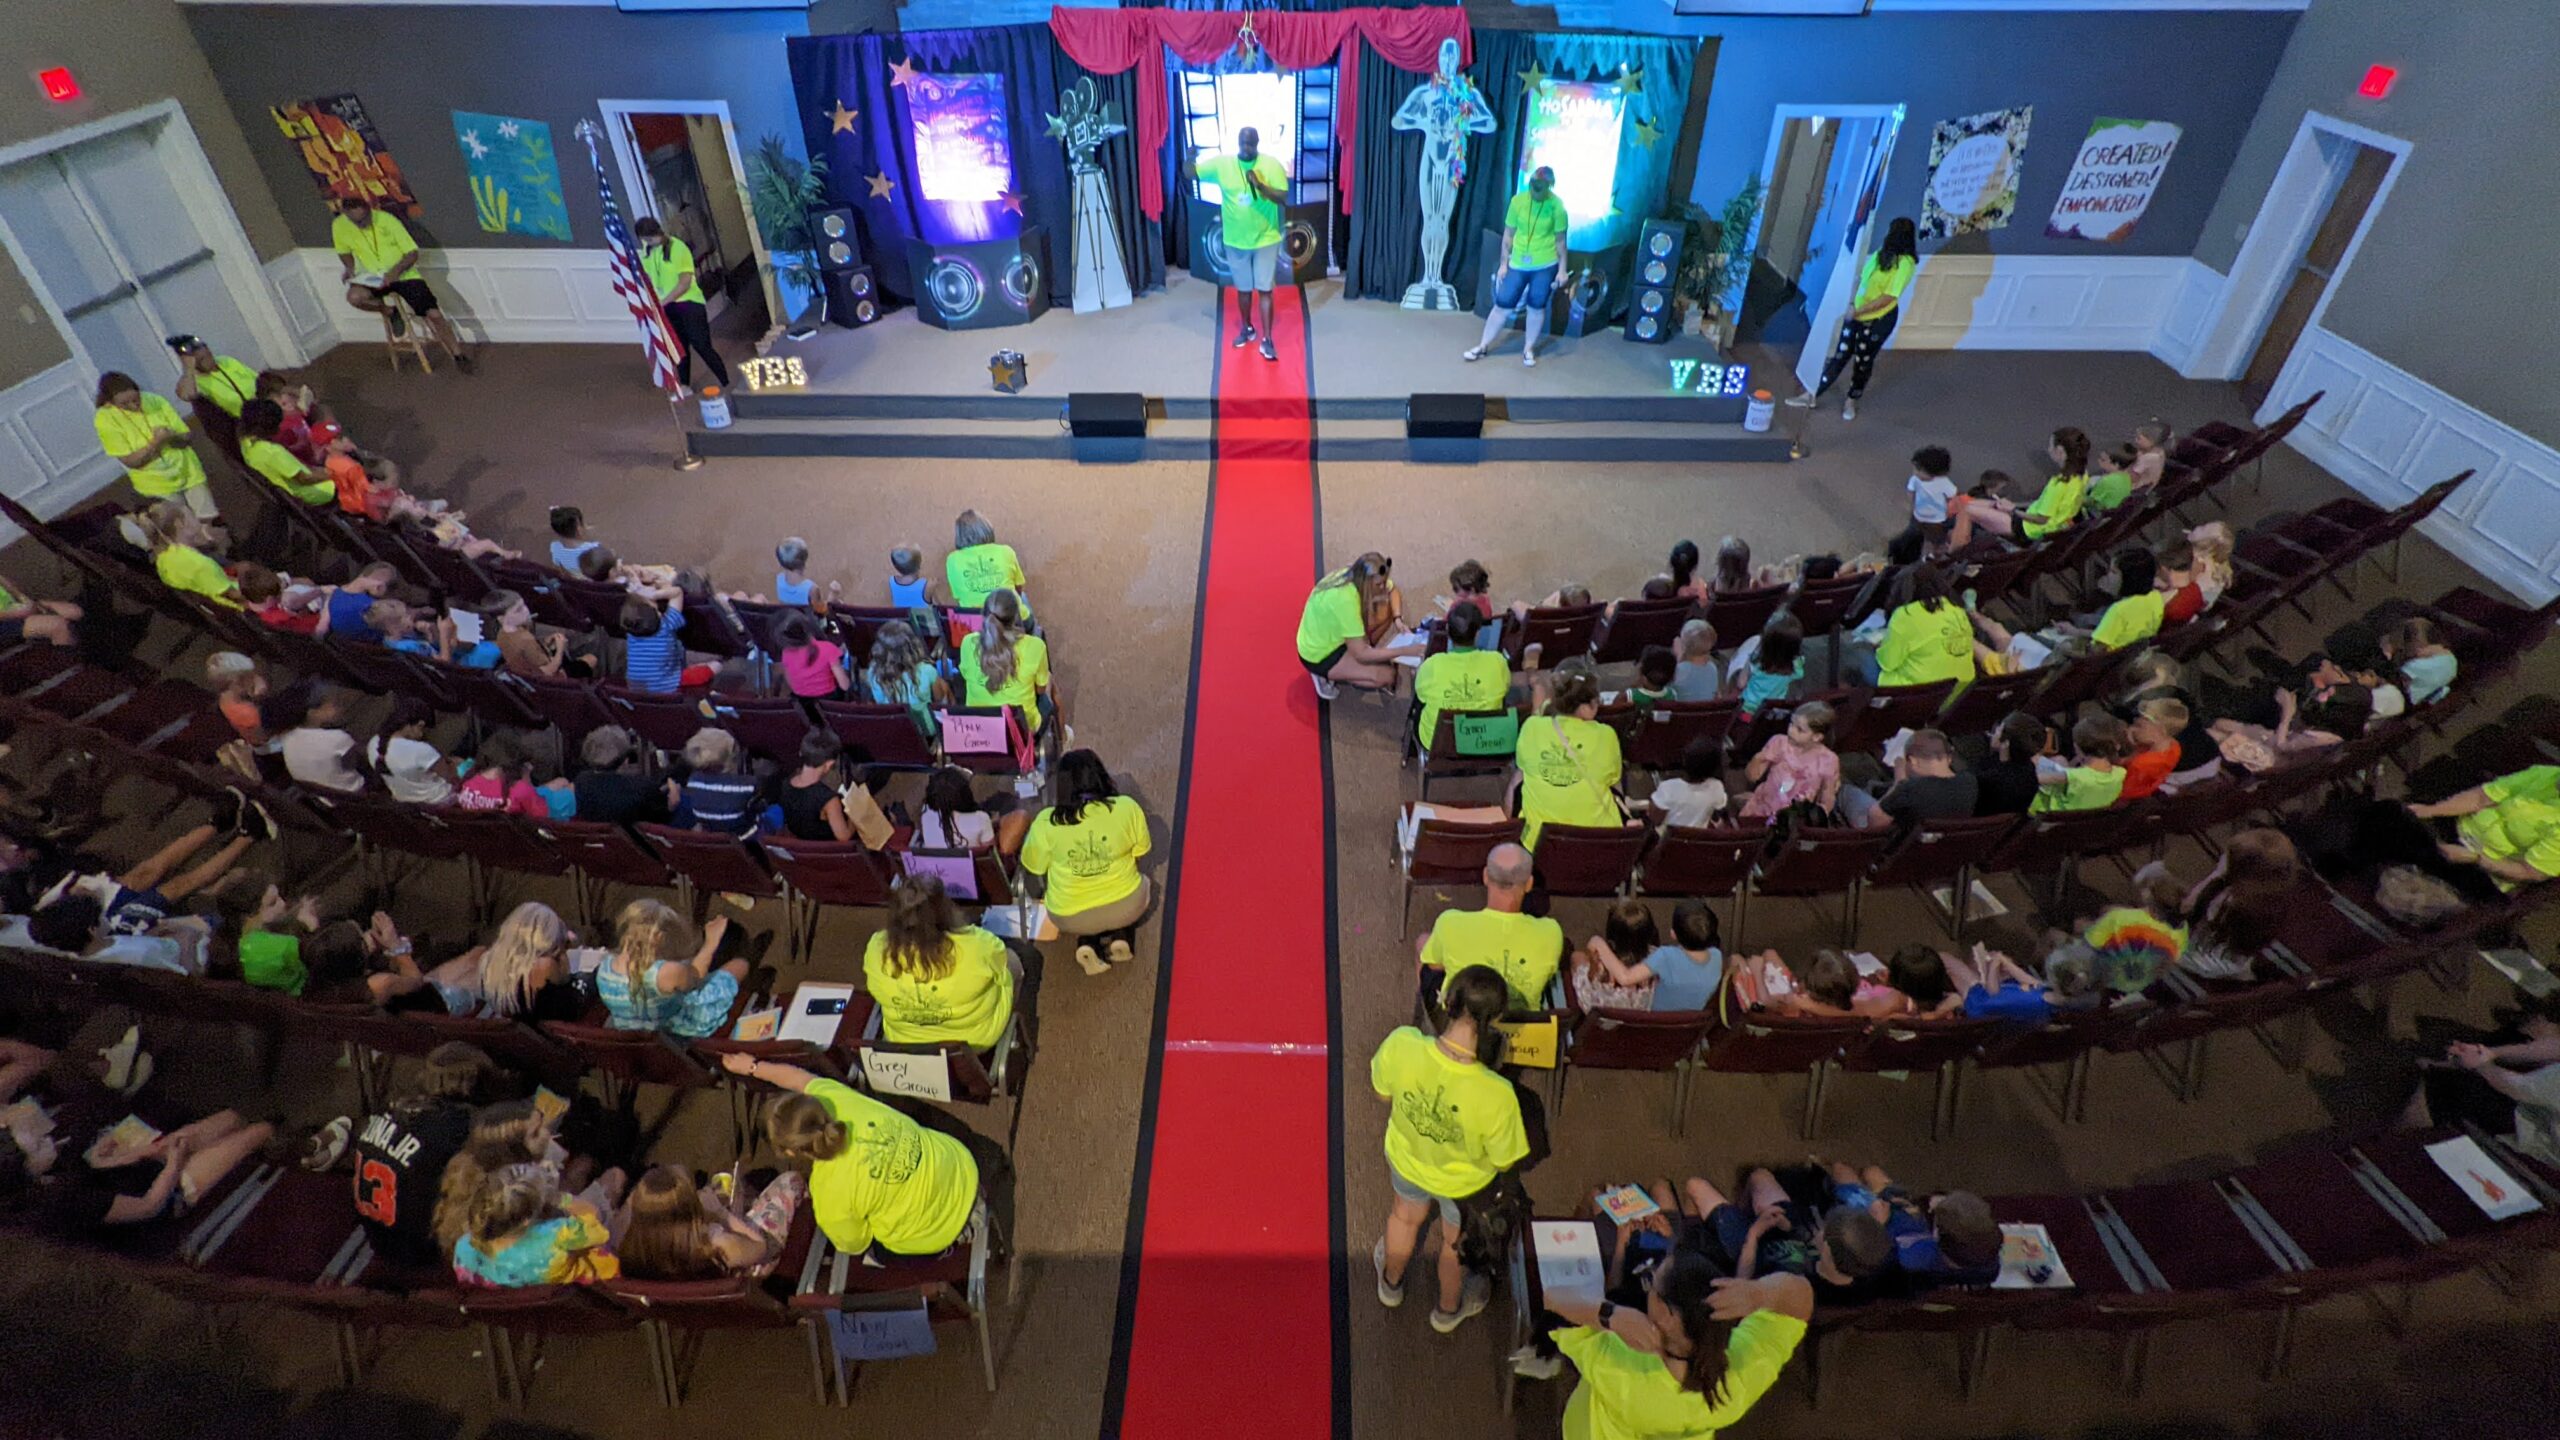 VBS 2022 – DAY 1